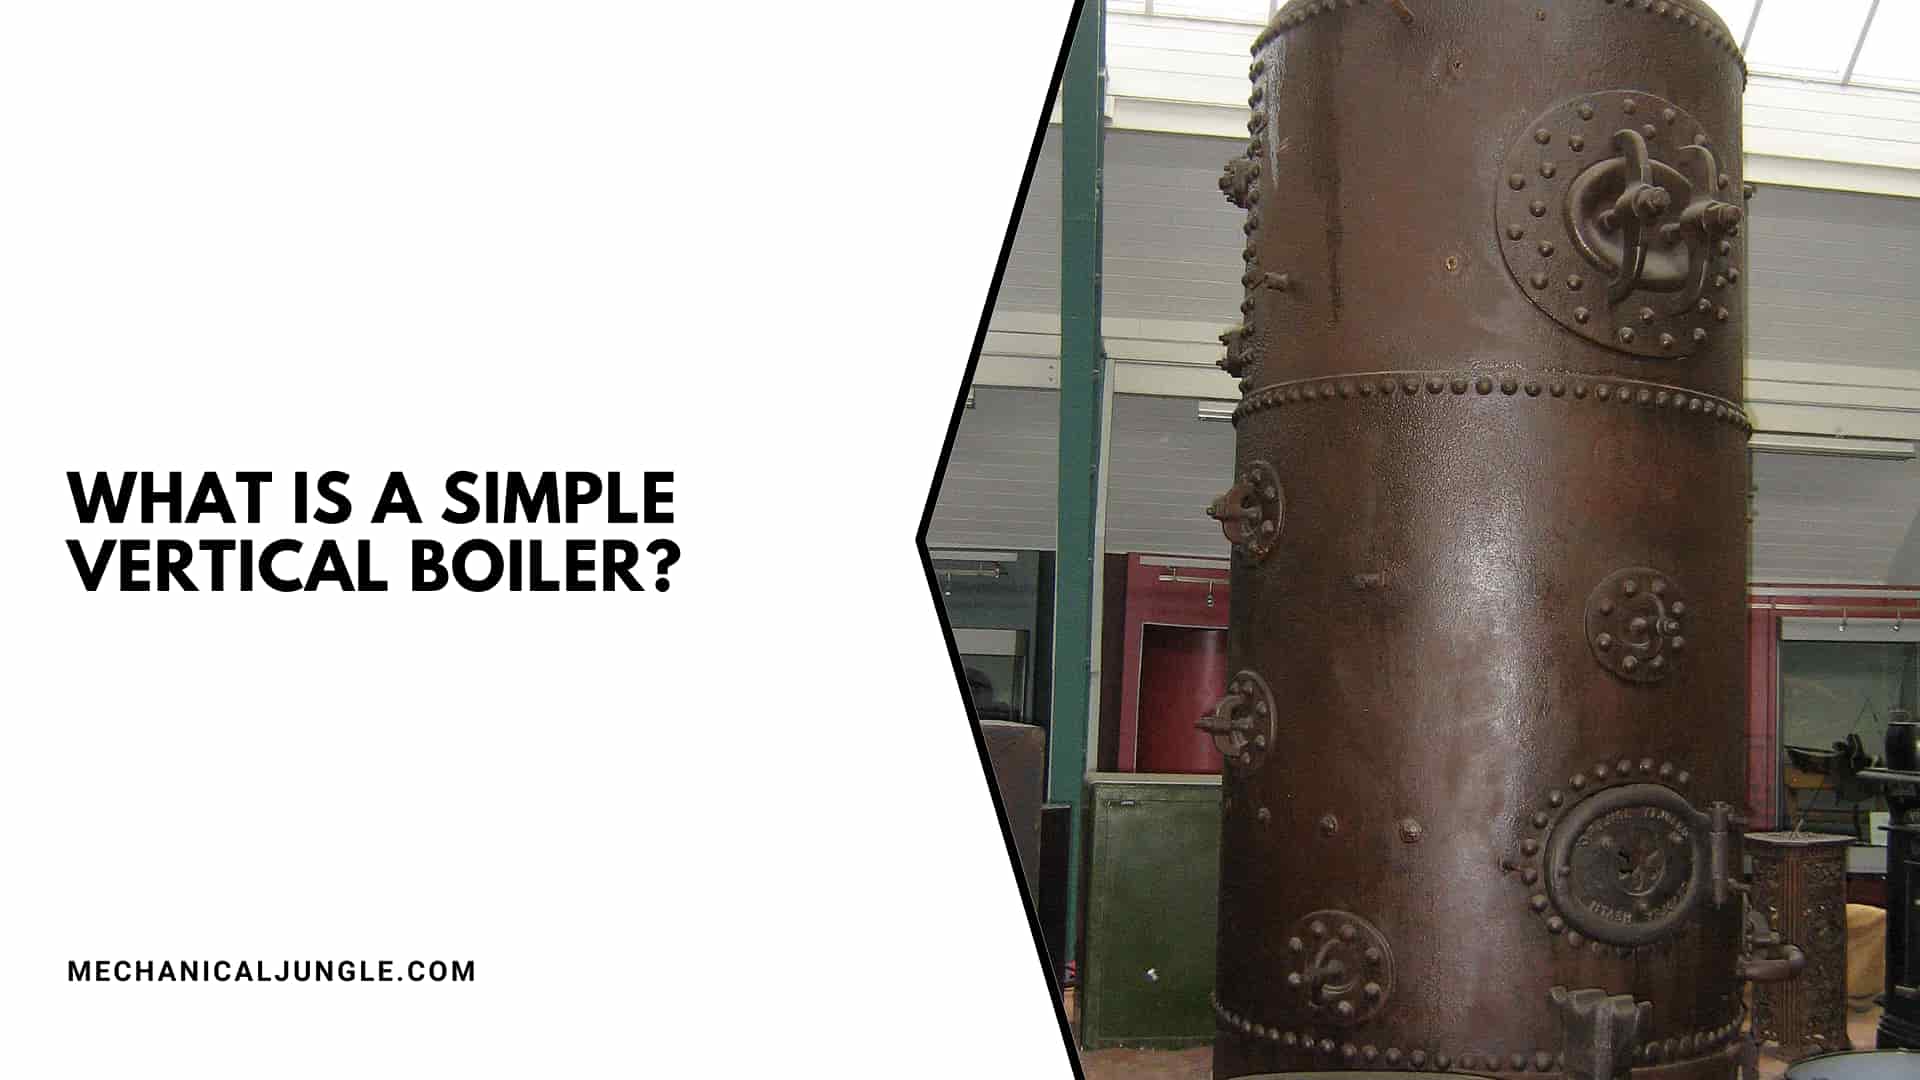 What Is a Simple Vertical Boiler?